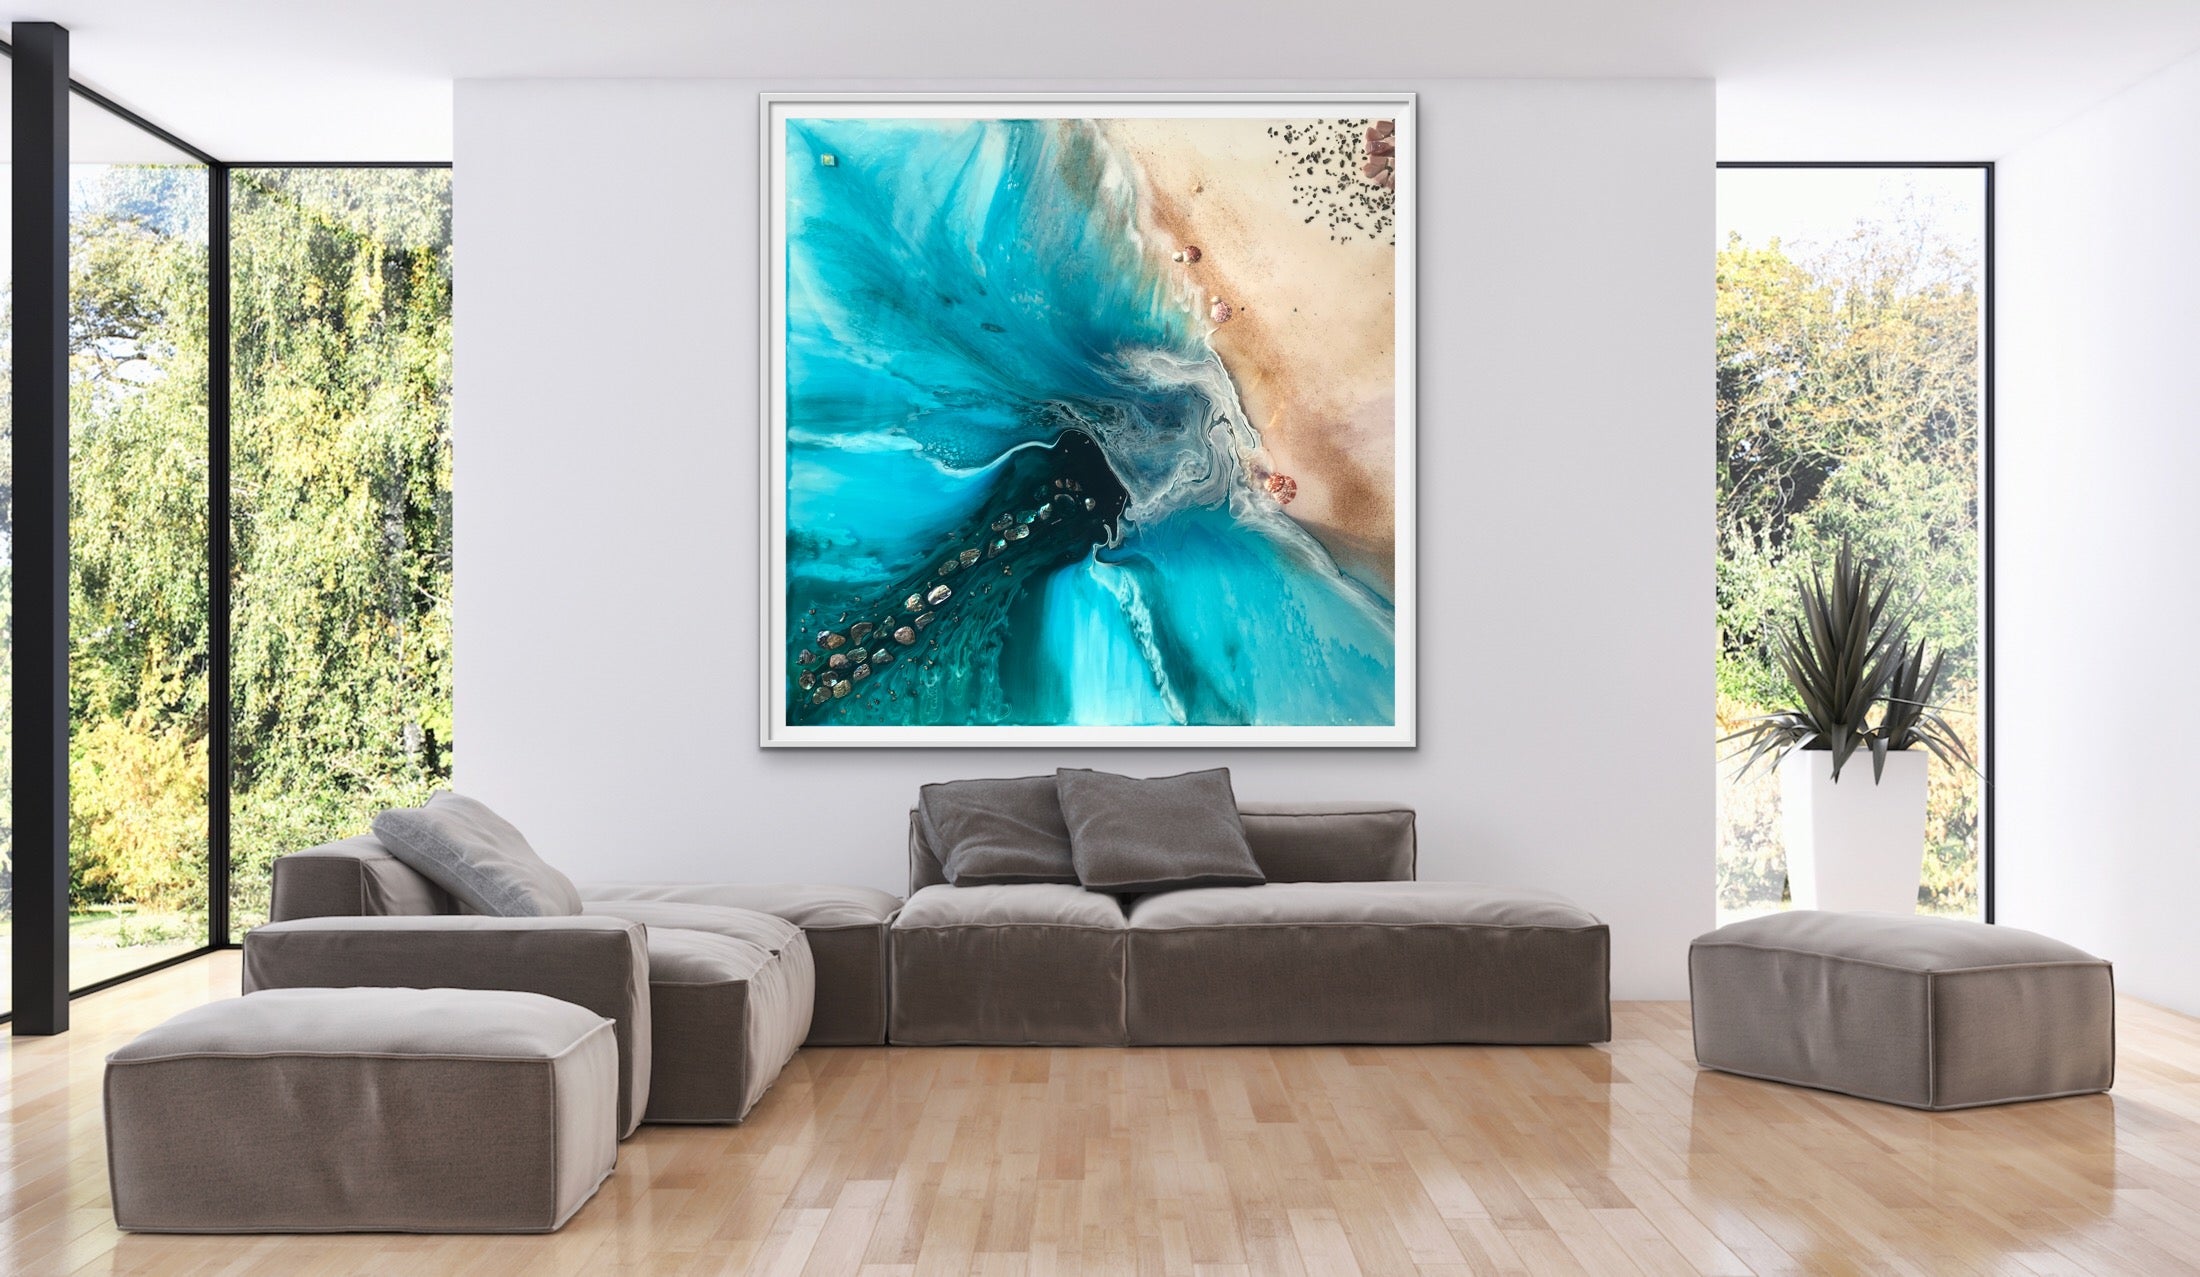 Abstract Seascape. Aqua. Rise Above 2 Square. Art Print. Antuanelle 6 Ocean Limited Edition Print